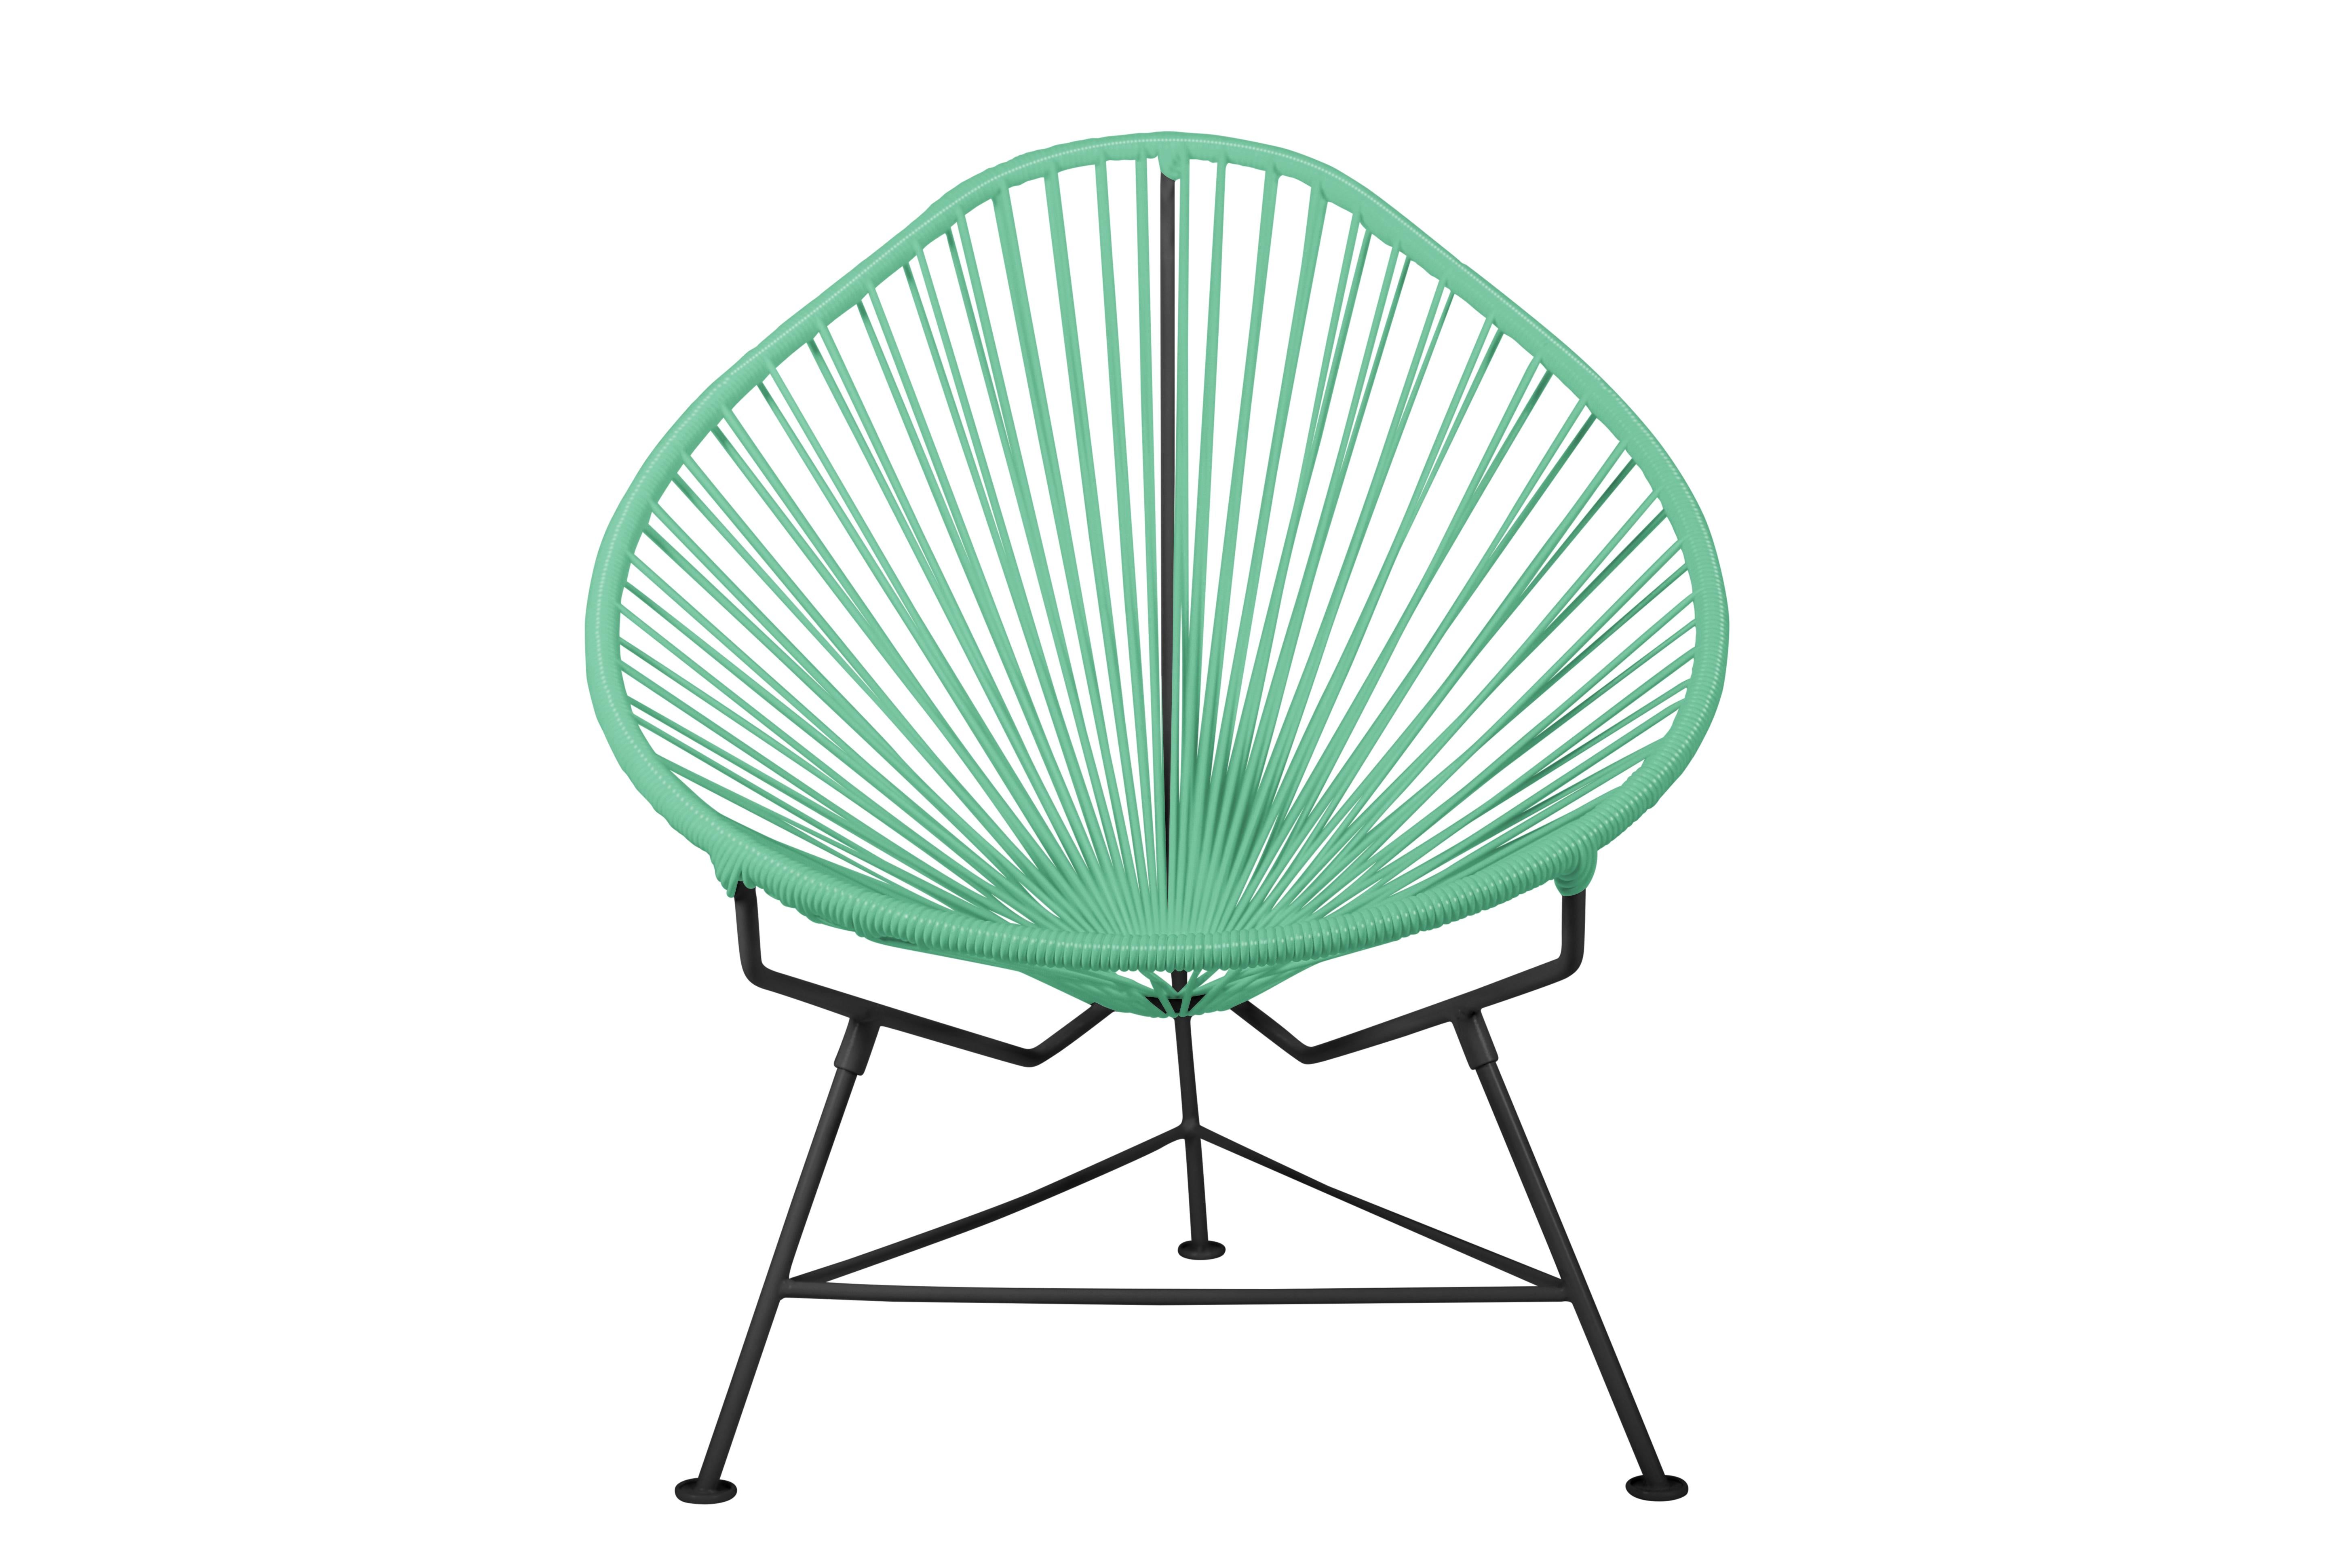 In 2009 Innit introduced the Acapulco Chair to design junkies around the world in 2009.  It has since become a renowned design classic and is featured in hot mags, incredible interiors, and lavish landscapes from Beverly Hills to Melbourne and